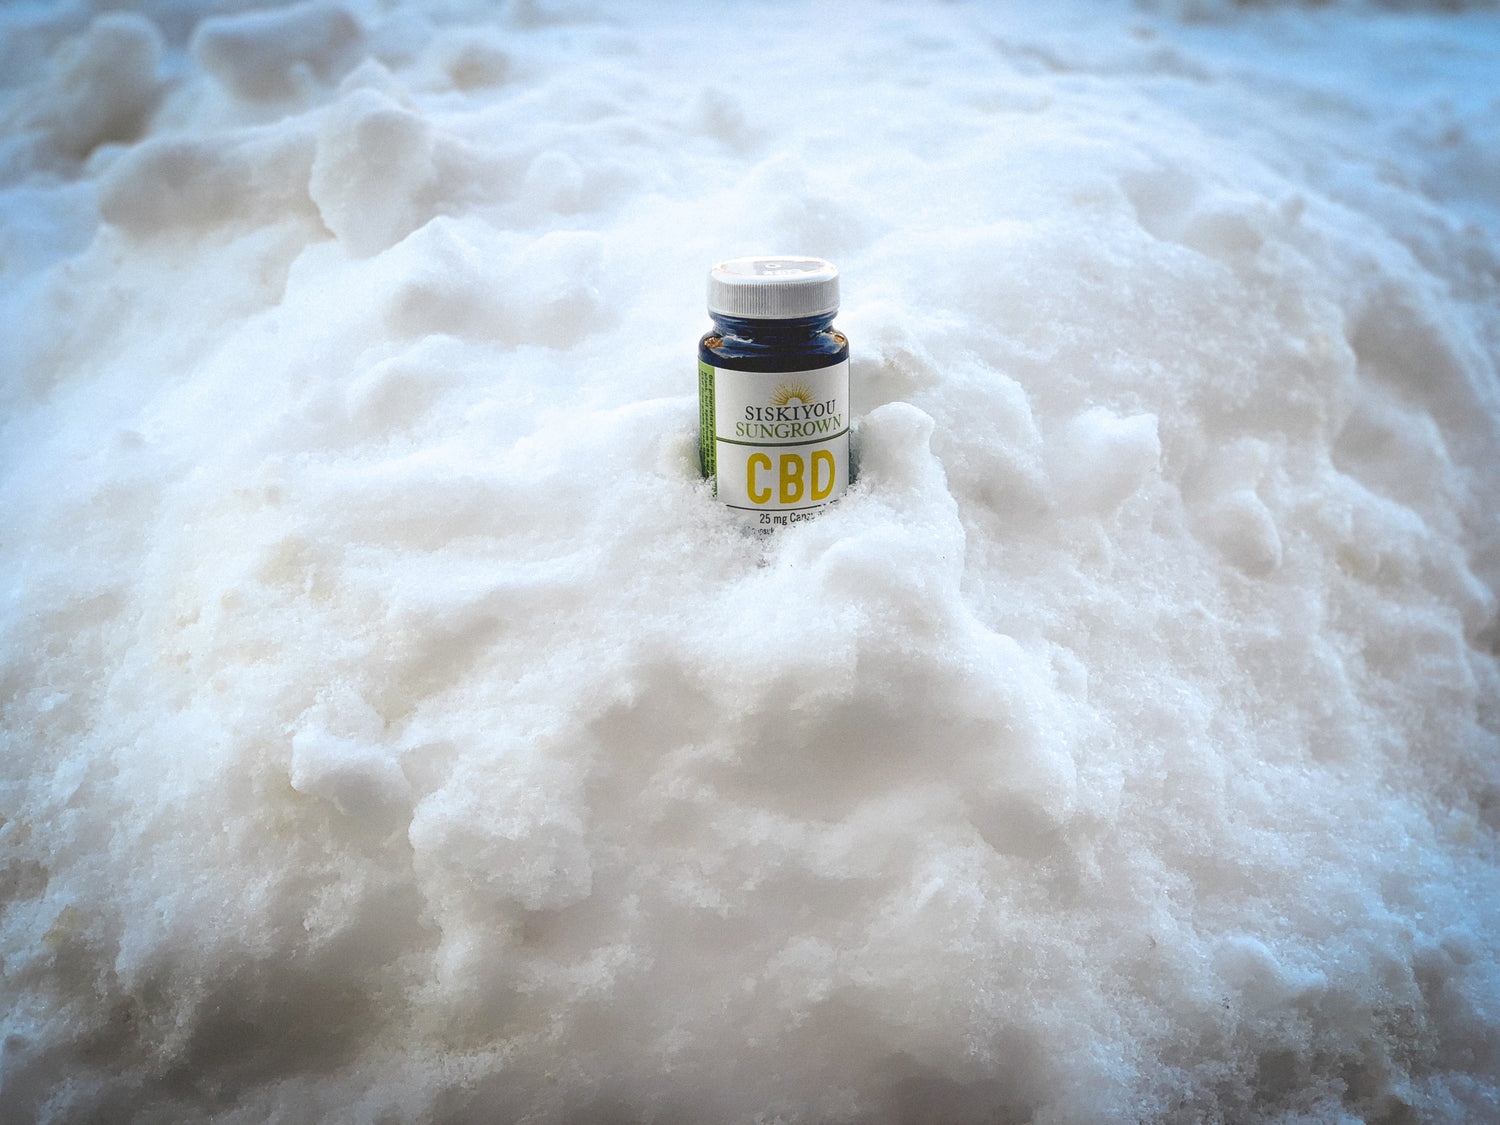 Can CBD oil give icy wintertime arthritis the slip?